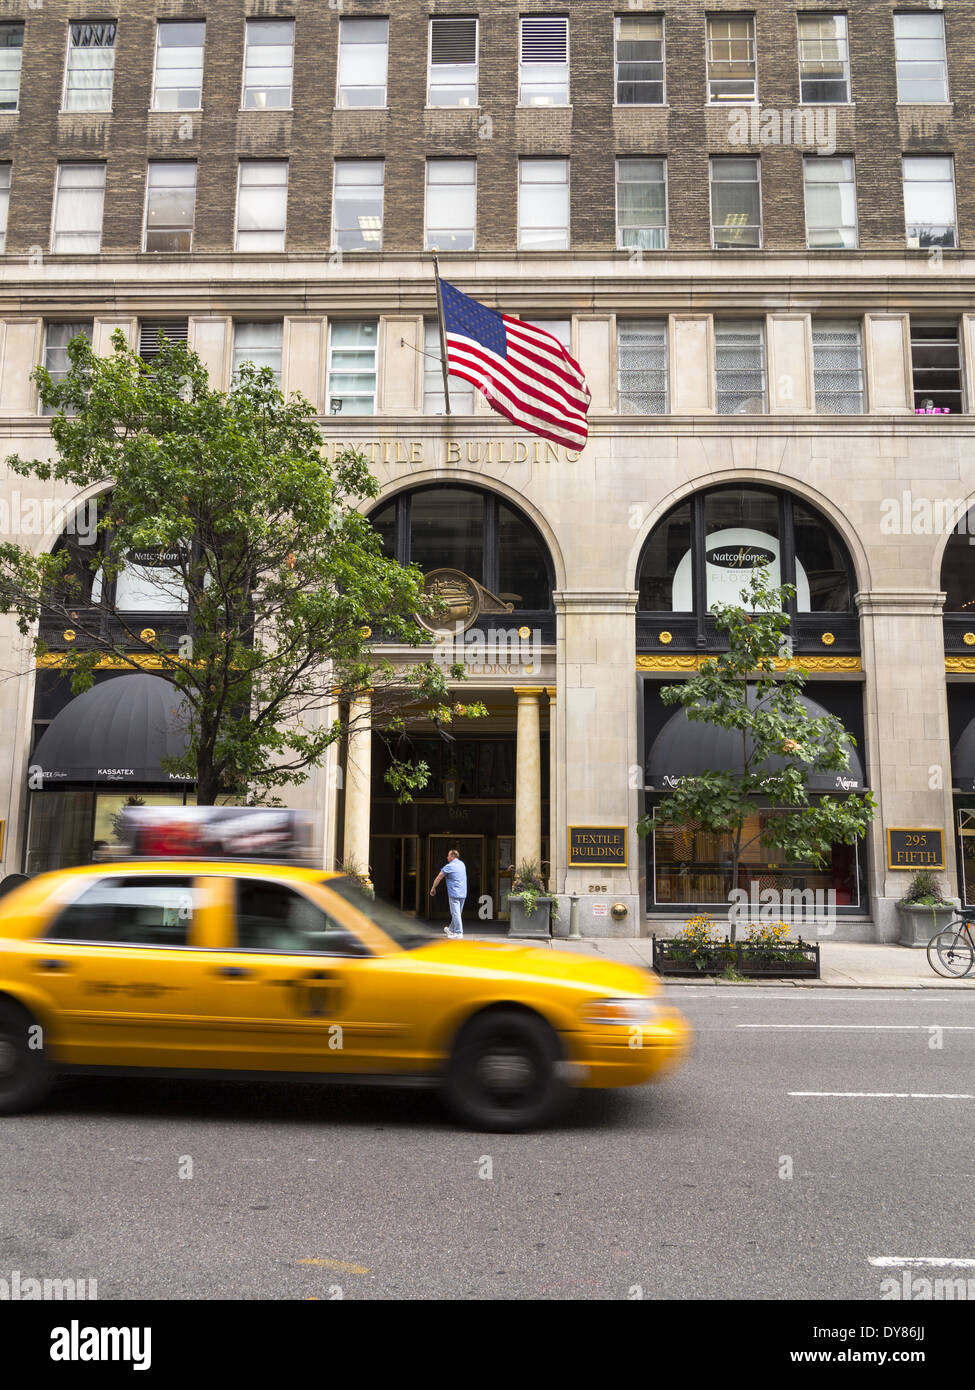 The Textile Building 295 Fifth Avenue speeding yellow taxi cab New York USA Stock Photo